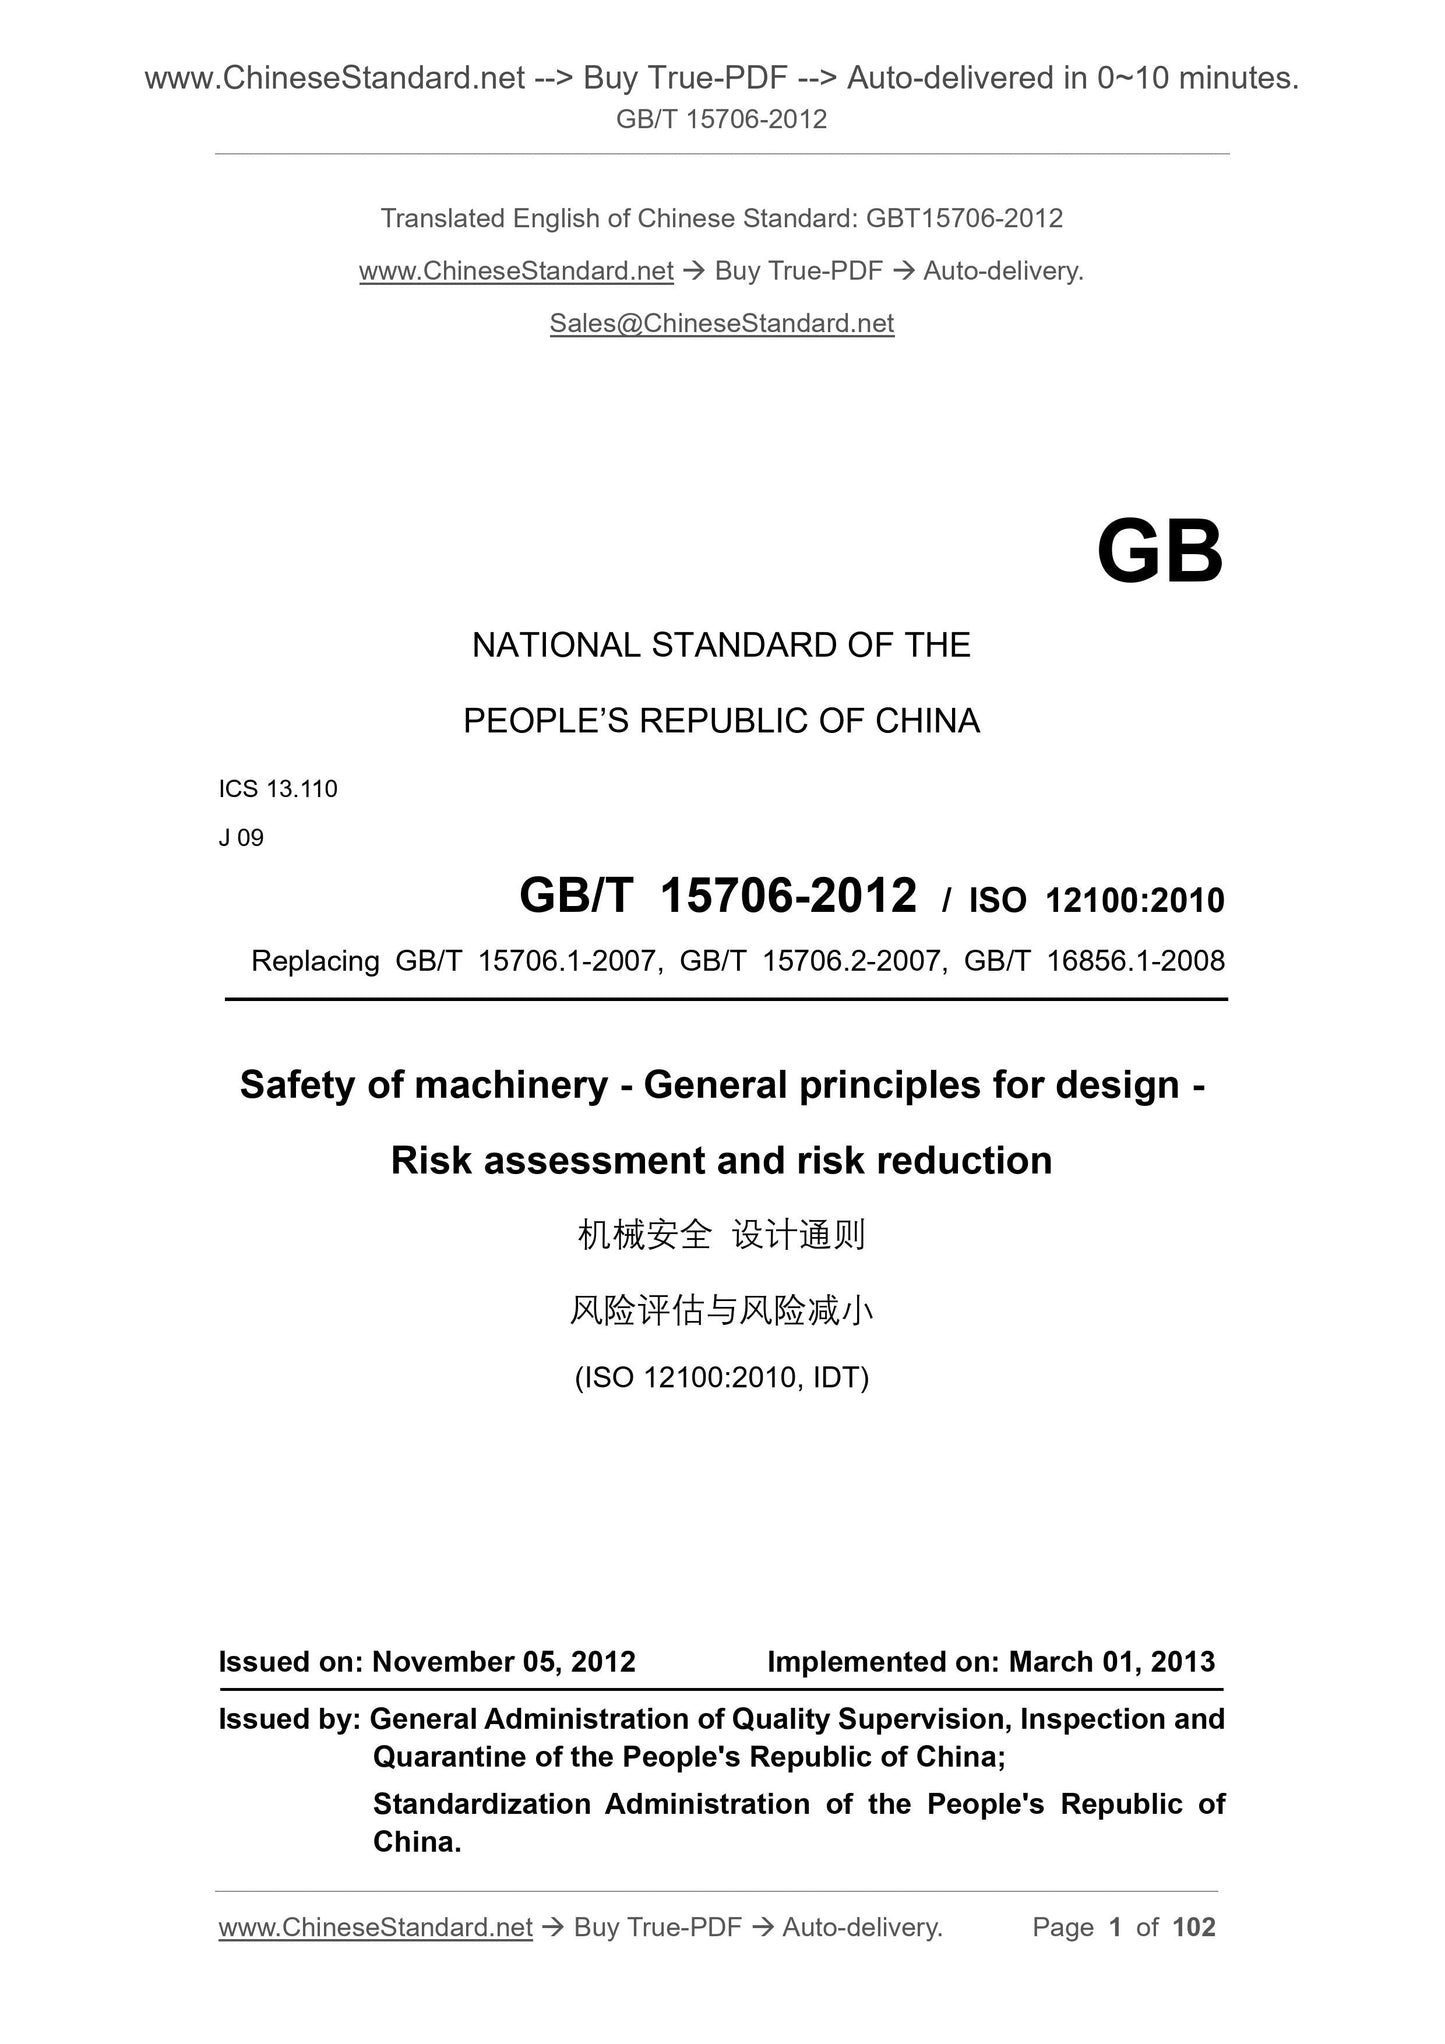 GB/T 15706-2012 Page 1